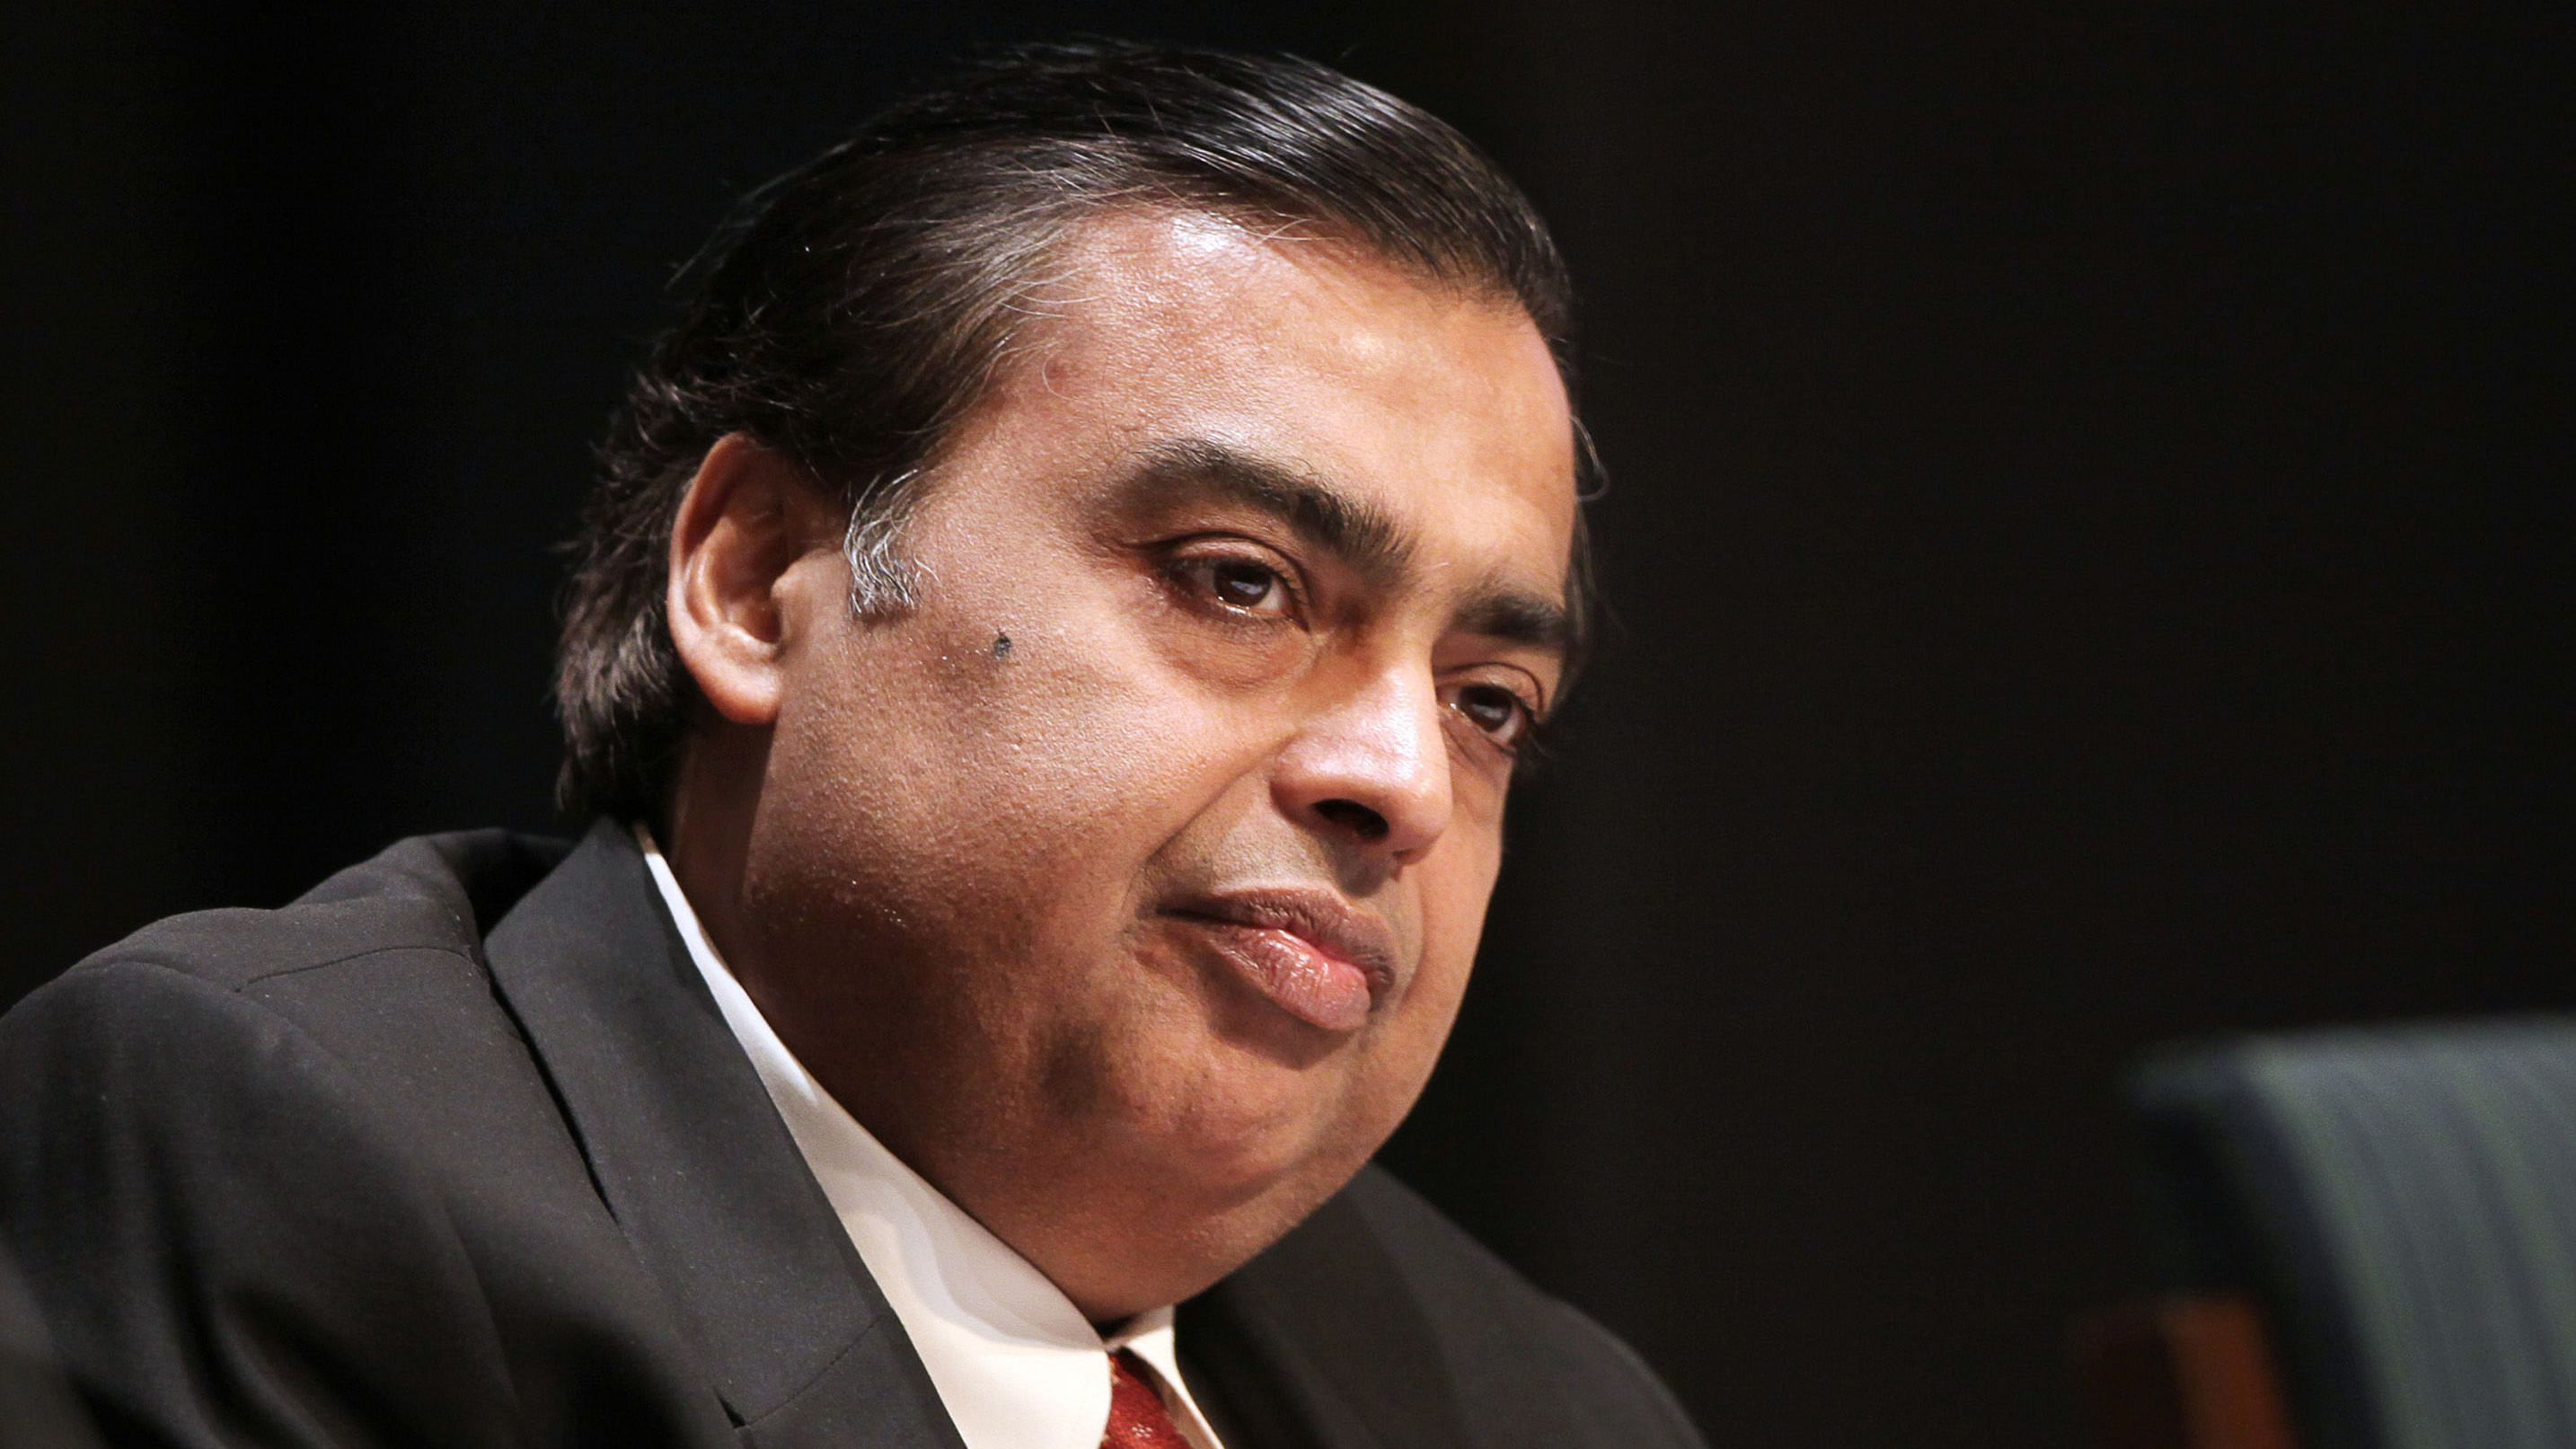 For Reliance, a first-time bidder in IPL’s 15-year history, the cricket streaming rights is also about fueling the e-commerce and retail ambitions of its technology venture Jio Platforms. Credit: Bloomberg photo